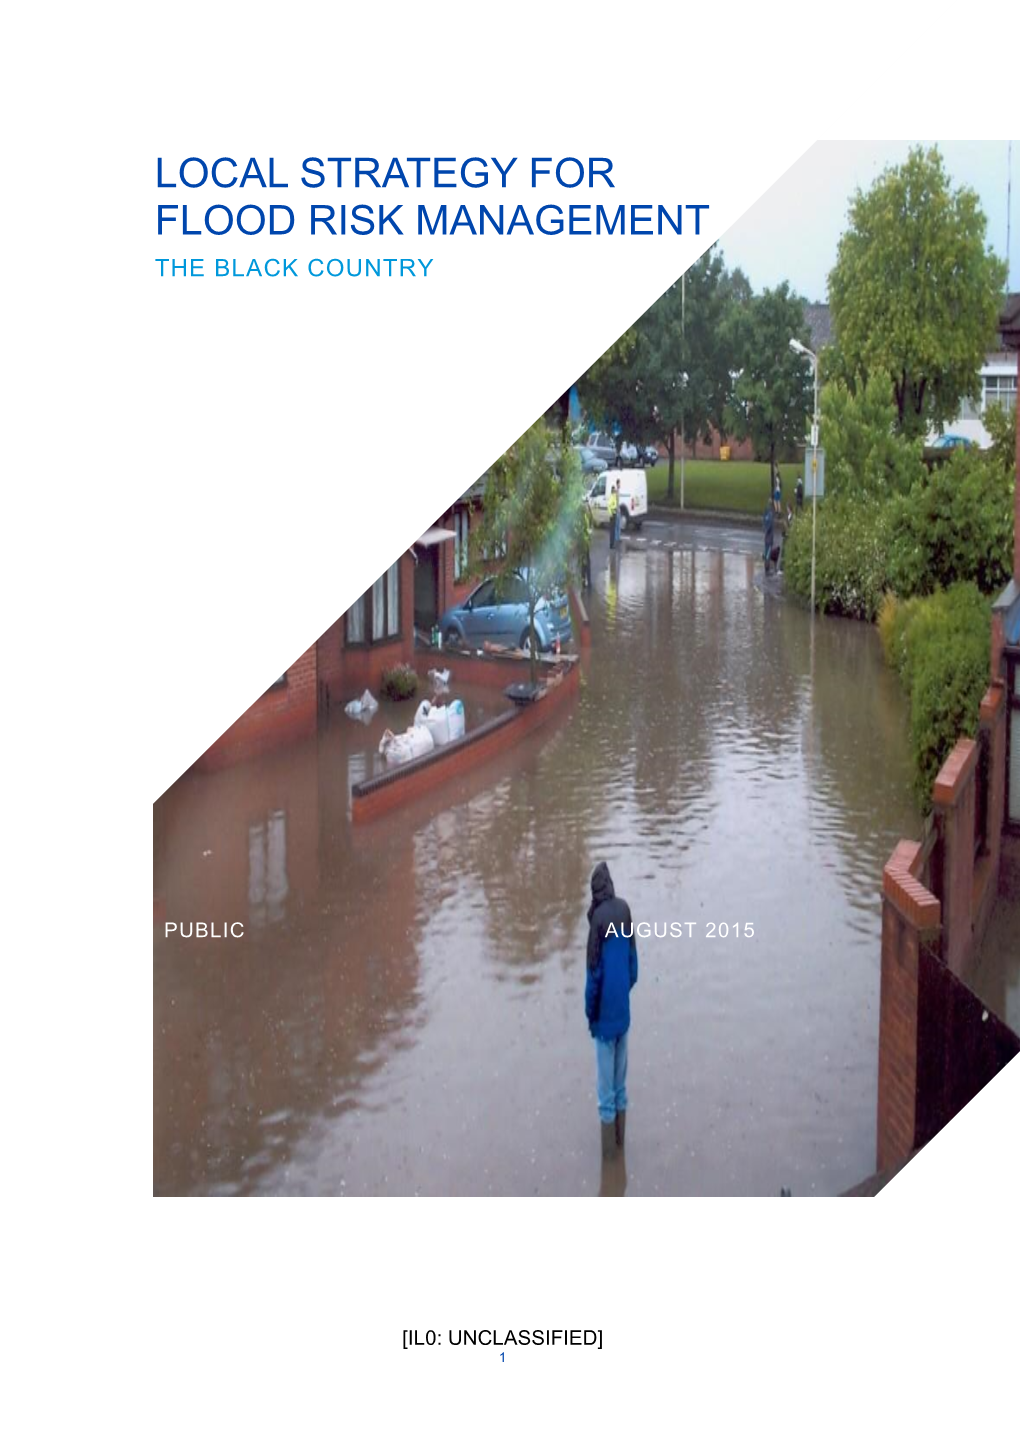 Local Strategy for Flood Risk Management the Black Country